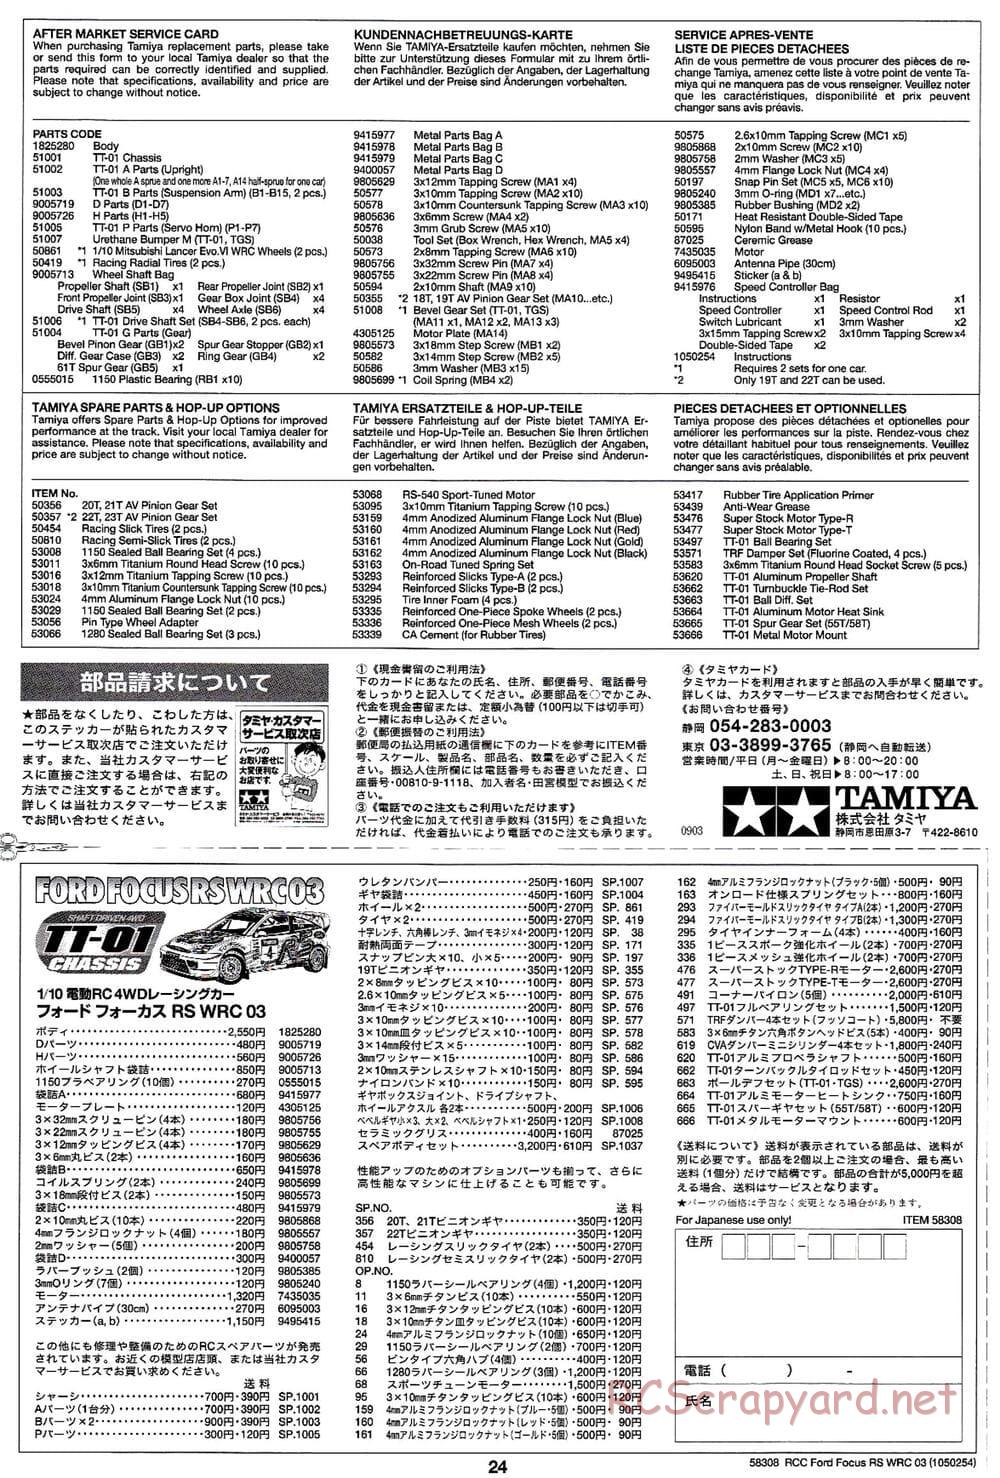 Tamiya - Ford Focus RS WRC 03 - TT-01 Chassis - Manual - Page 24